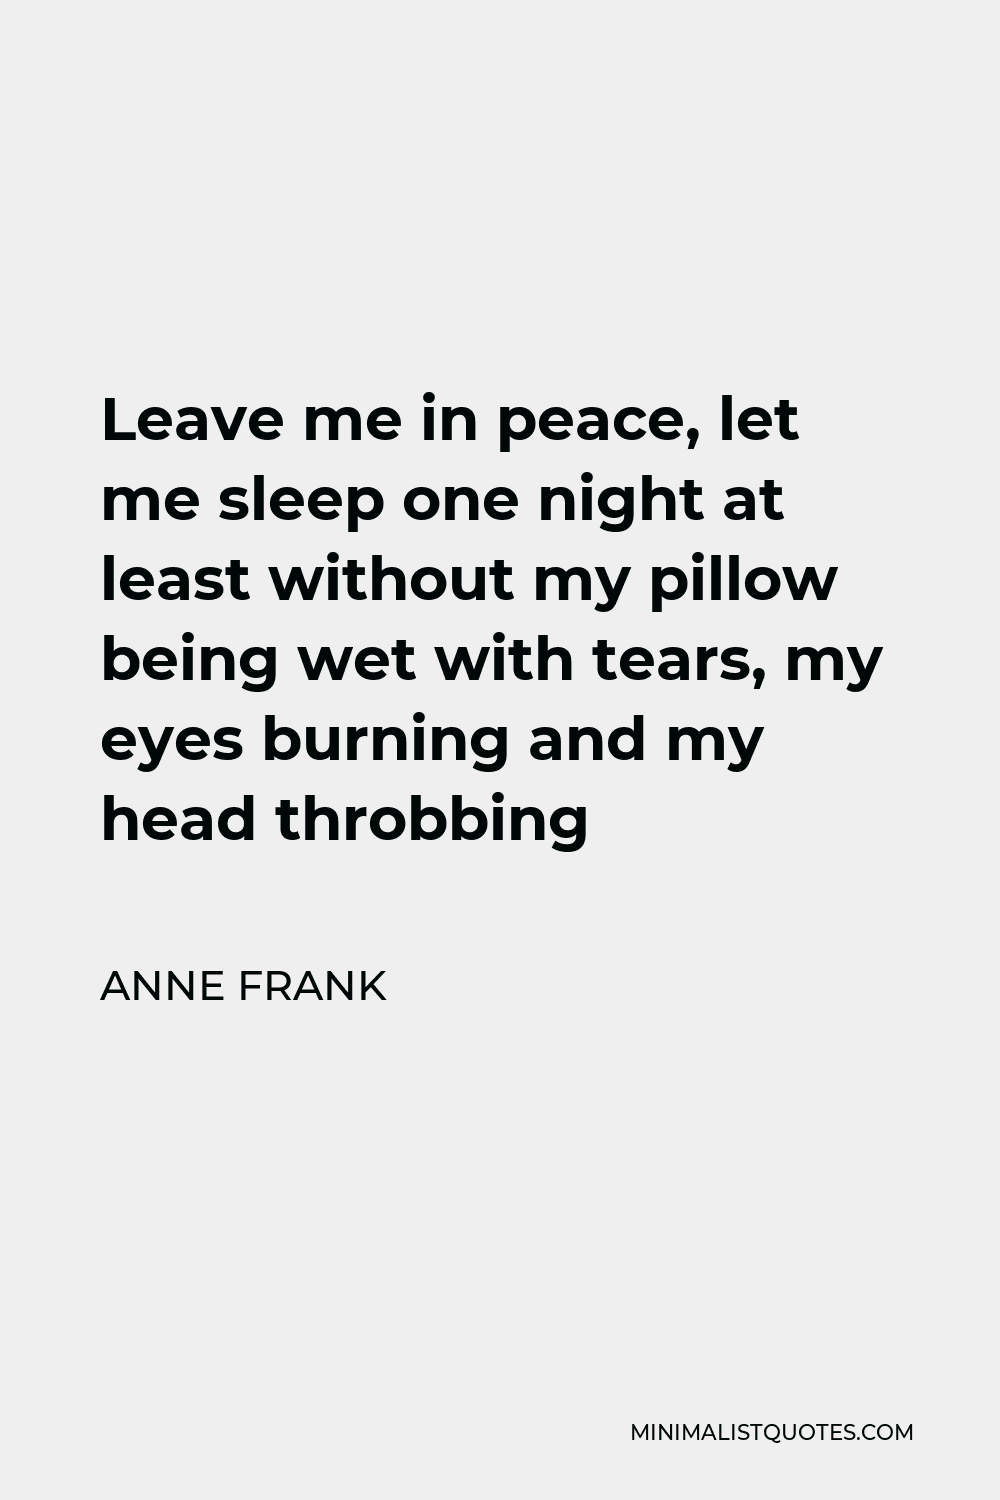 Anne Frank Quote - Leave me in peace, let me sleep one night at least without my pillow being wet with tears, my eyes burning and my head throbbing